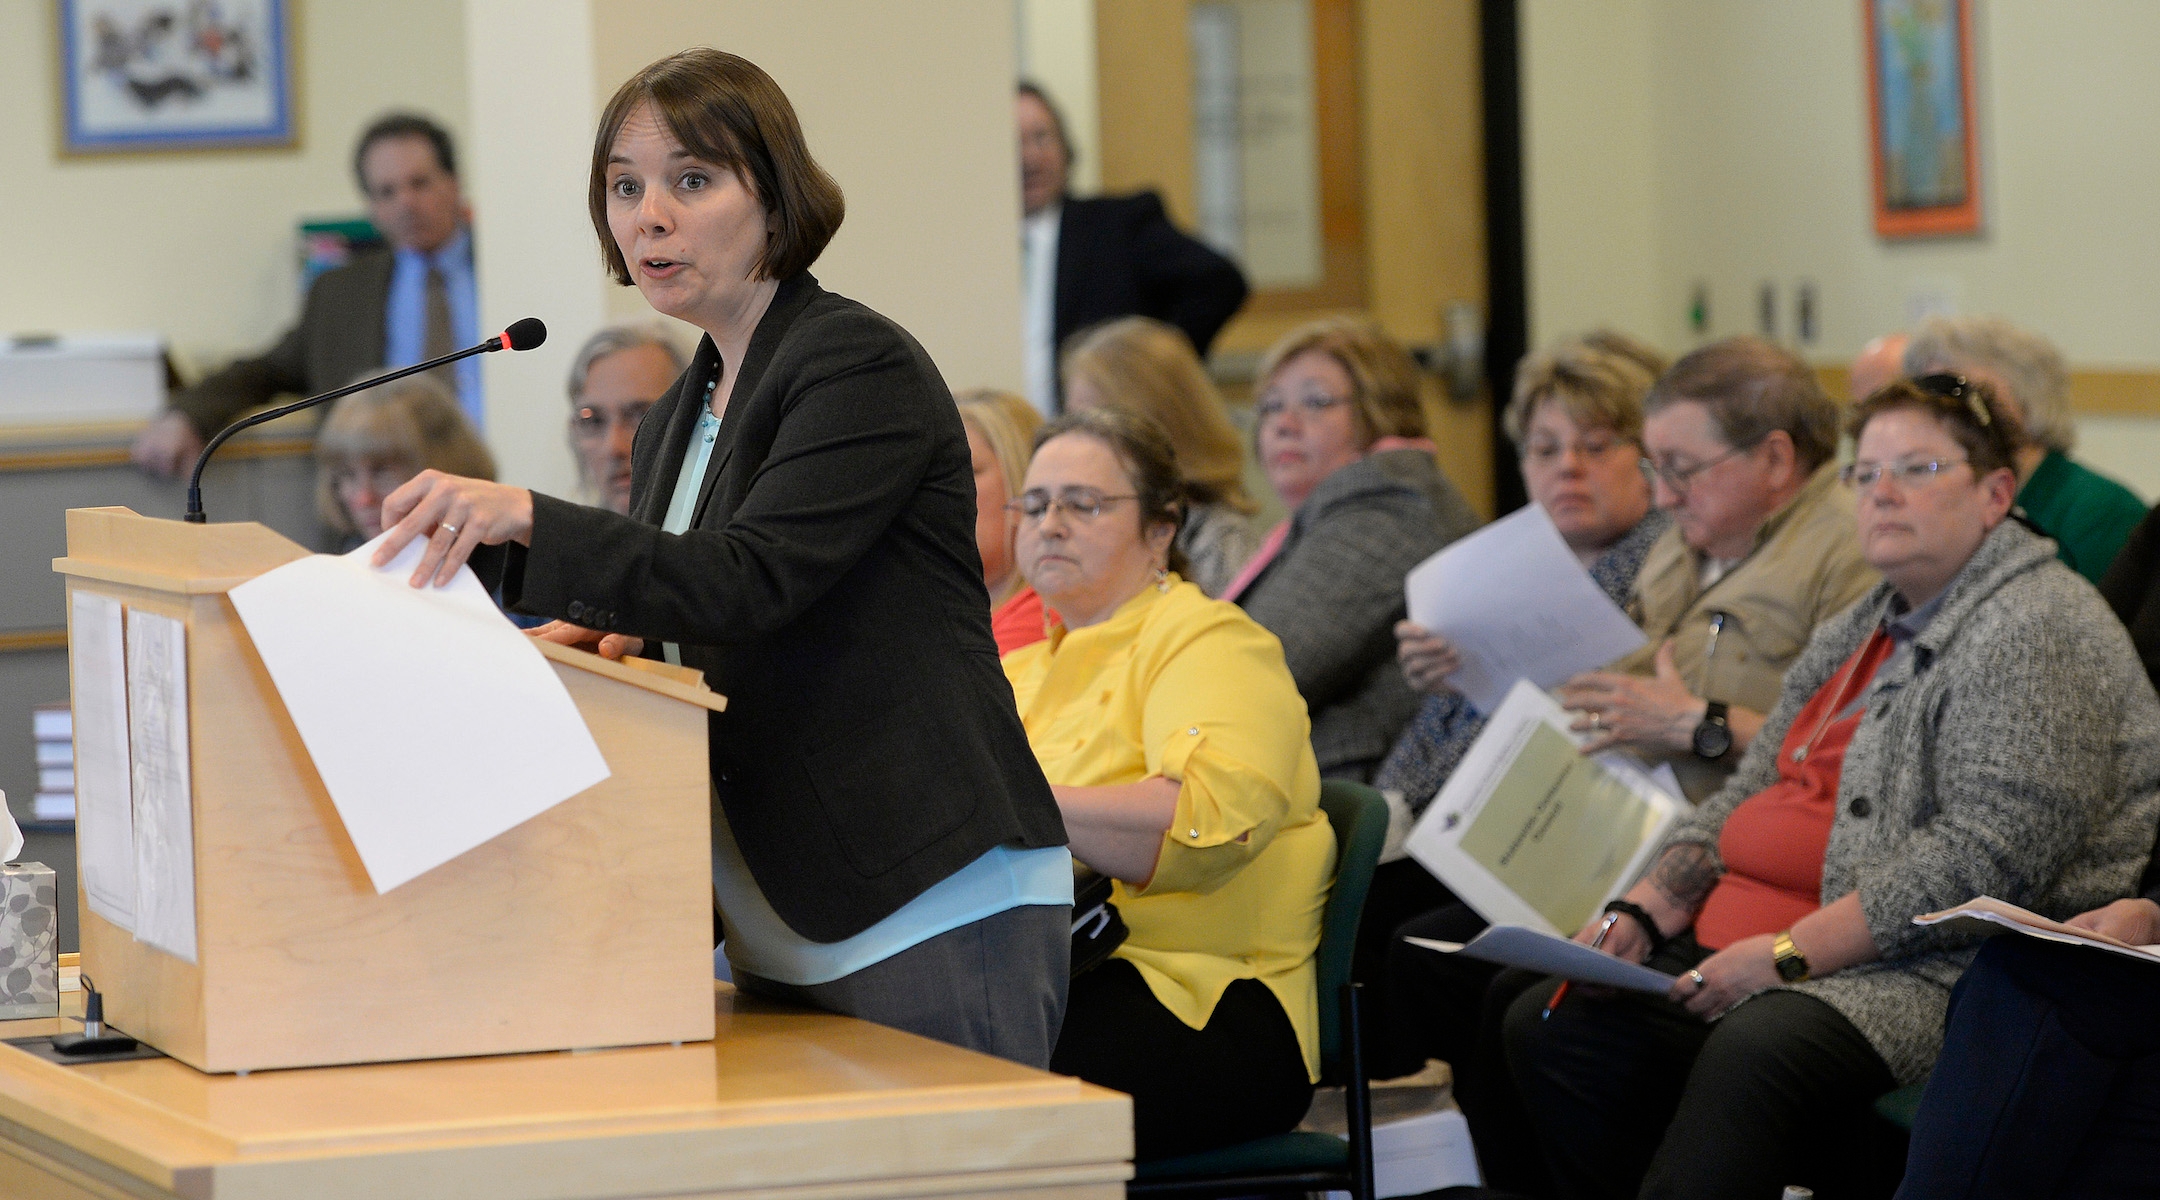 Shenna Bellows speaks at a hearing in Augusta, Maine, on May 2, 2017, while a Democratic state senator. Bellows would later become executive director of the Maine Holocaust and Human Rights Center and then, in 2020, the state’s Secretary of State. (Shawn Patrick Ouellette/Portland Portland Press Herald via Getty Images)